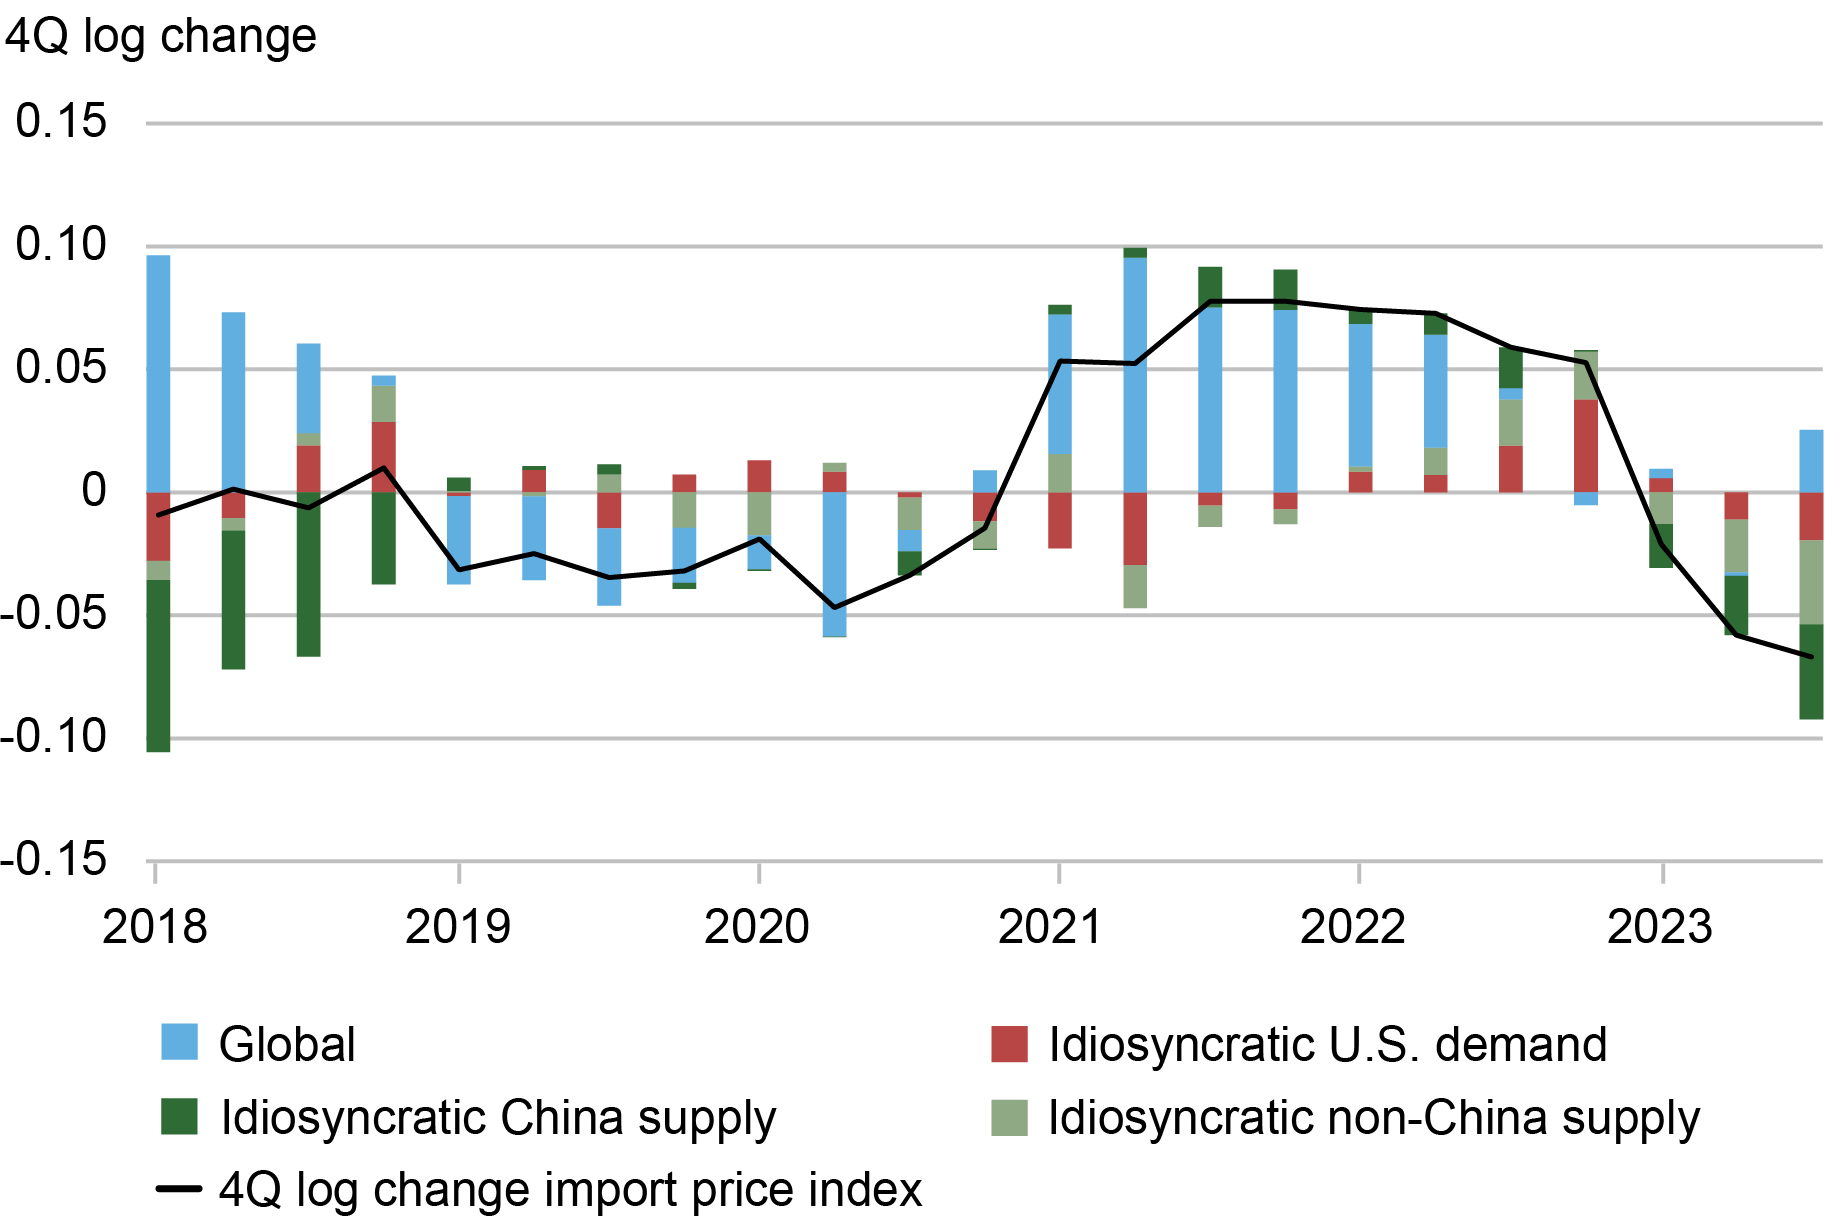 Line and bar chart tracking the rise and fall of 4Q log changes in aggregate U.S. import prices from 1Q 2018 to 3Q 2023 (black line), with colored bars representing global (blue), idiosyncratic U.S. demand (red), idiosyncratic China supply (dark green), and idiosyncratic non-China supply (light green)